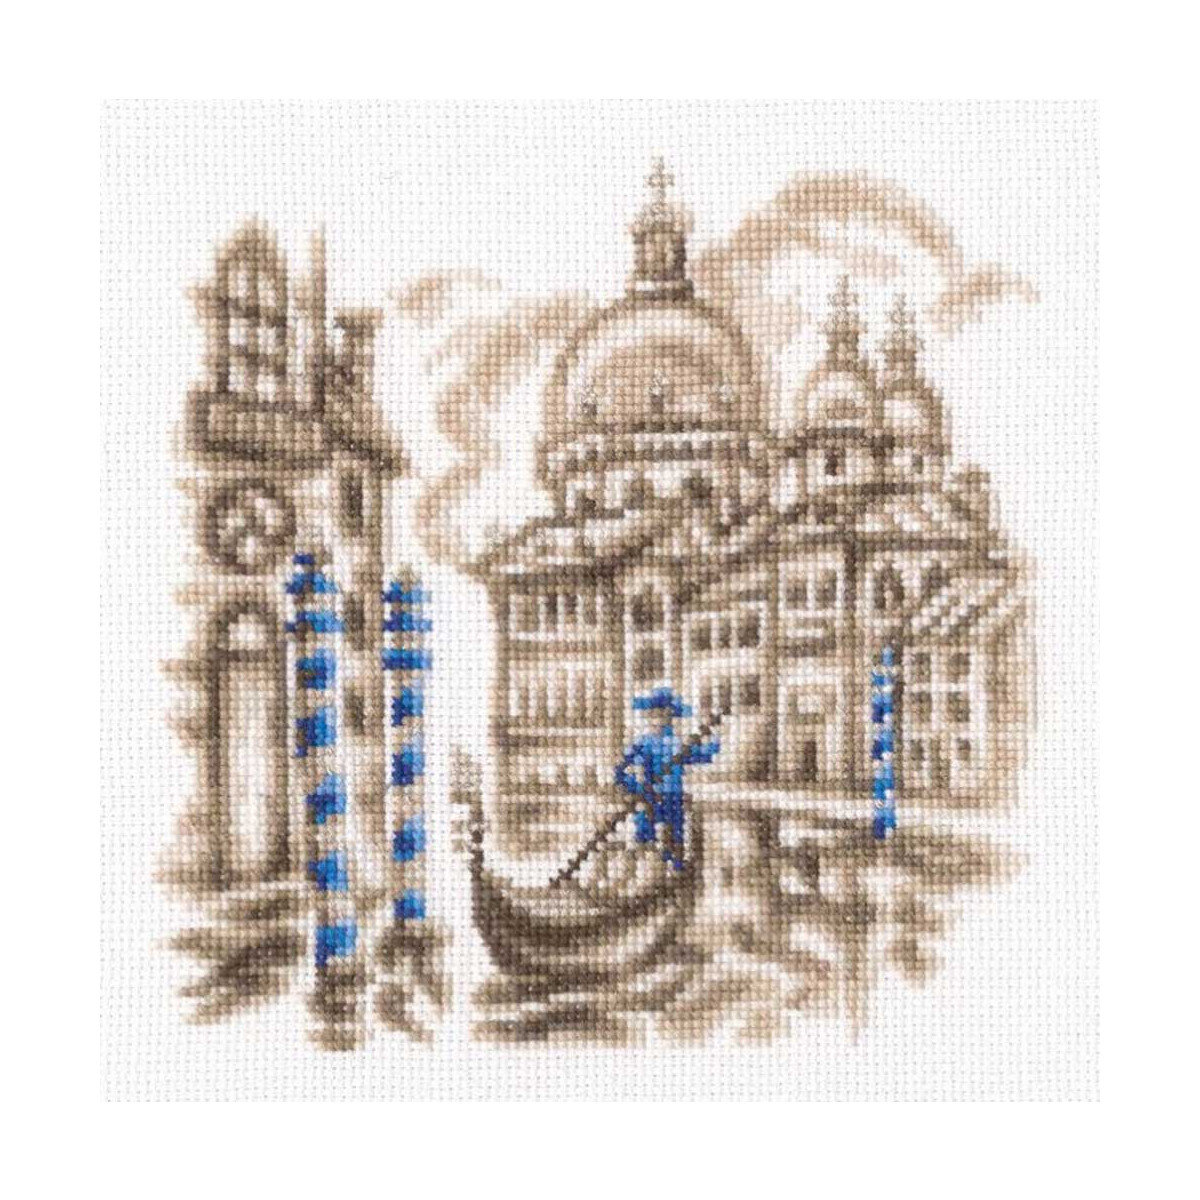 RTO counted Cross Stitch Kit "On the streets of...